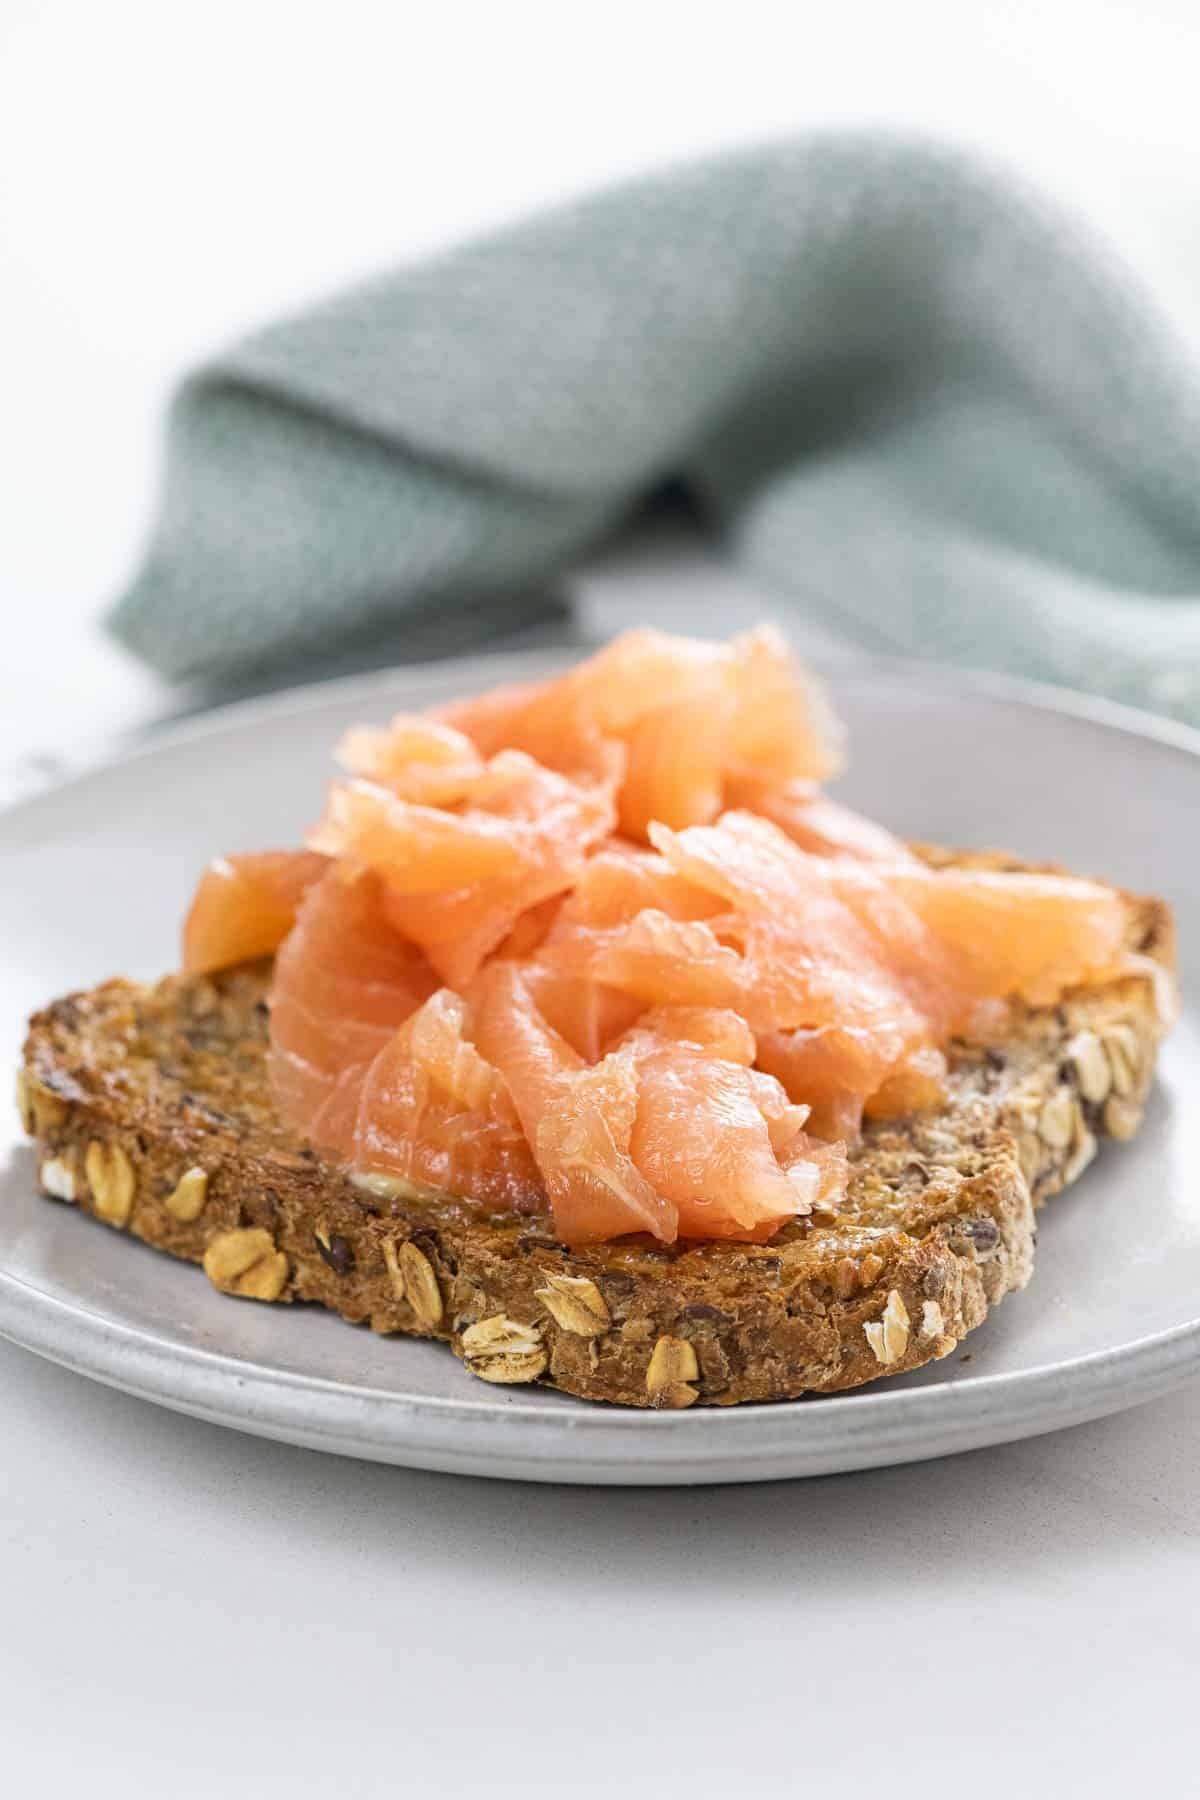 cured salmon (gravlax) on buttered toast